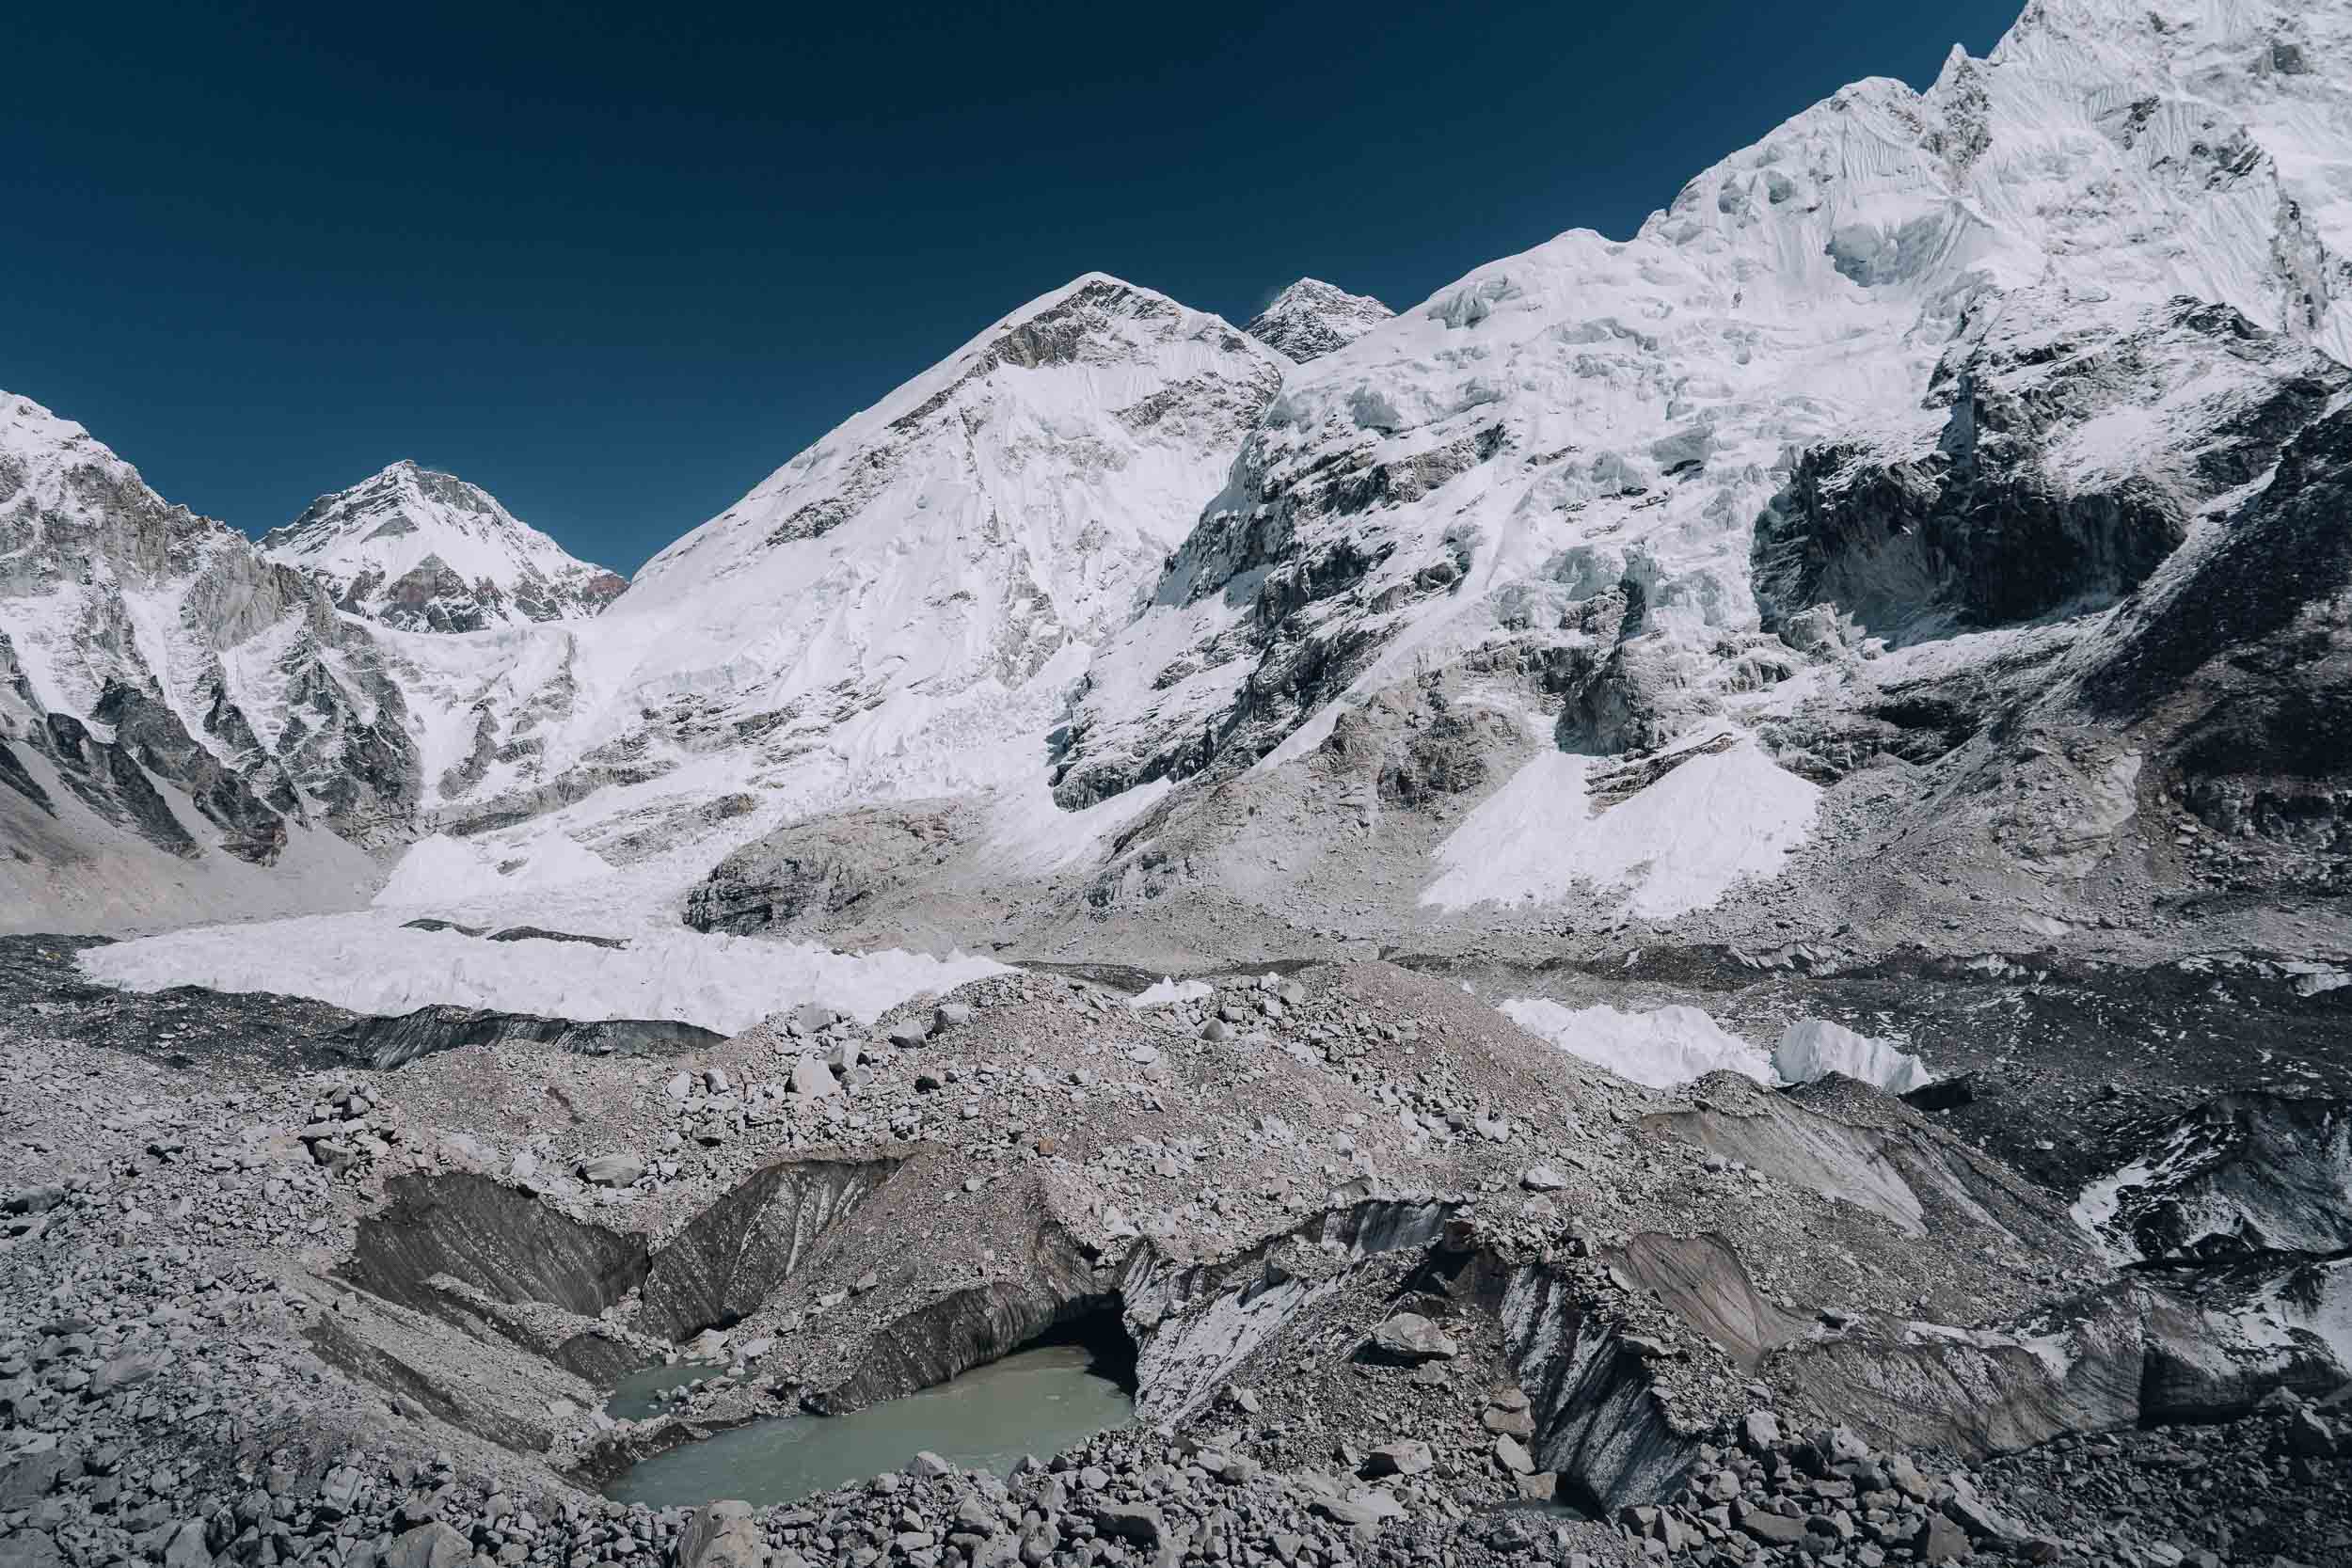 Mount Everest and the khumbu ice fall